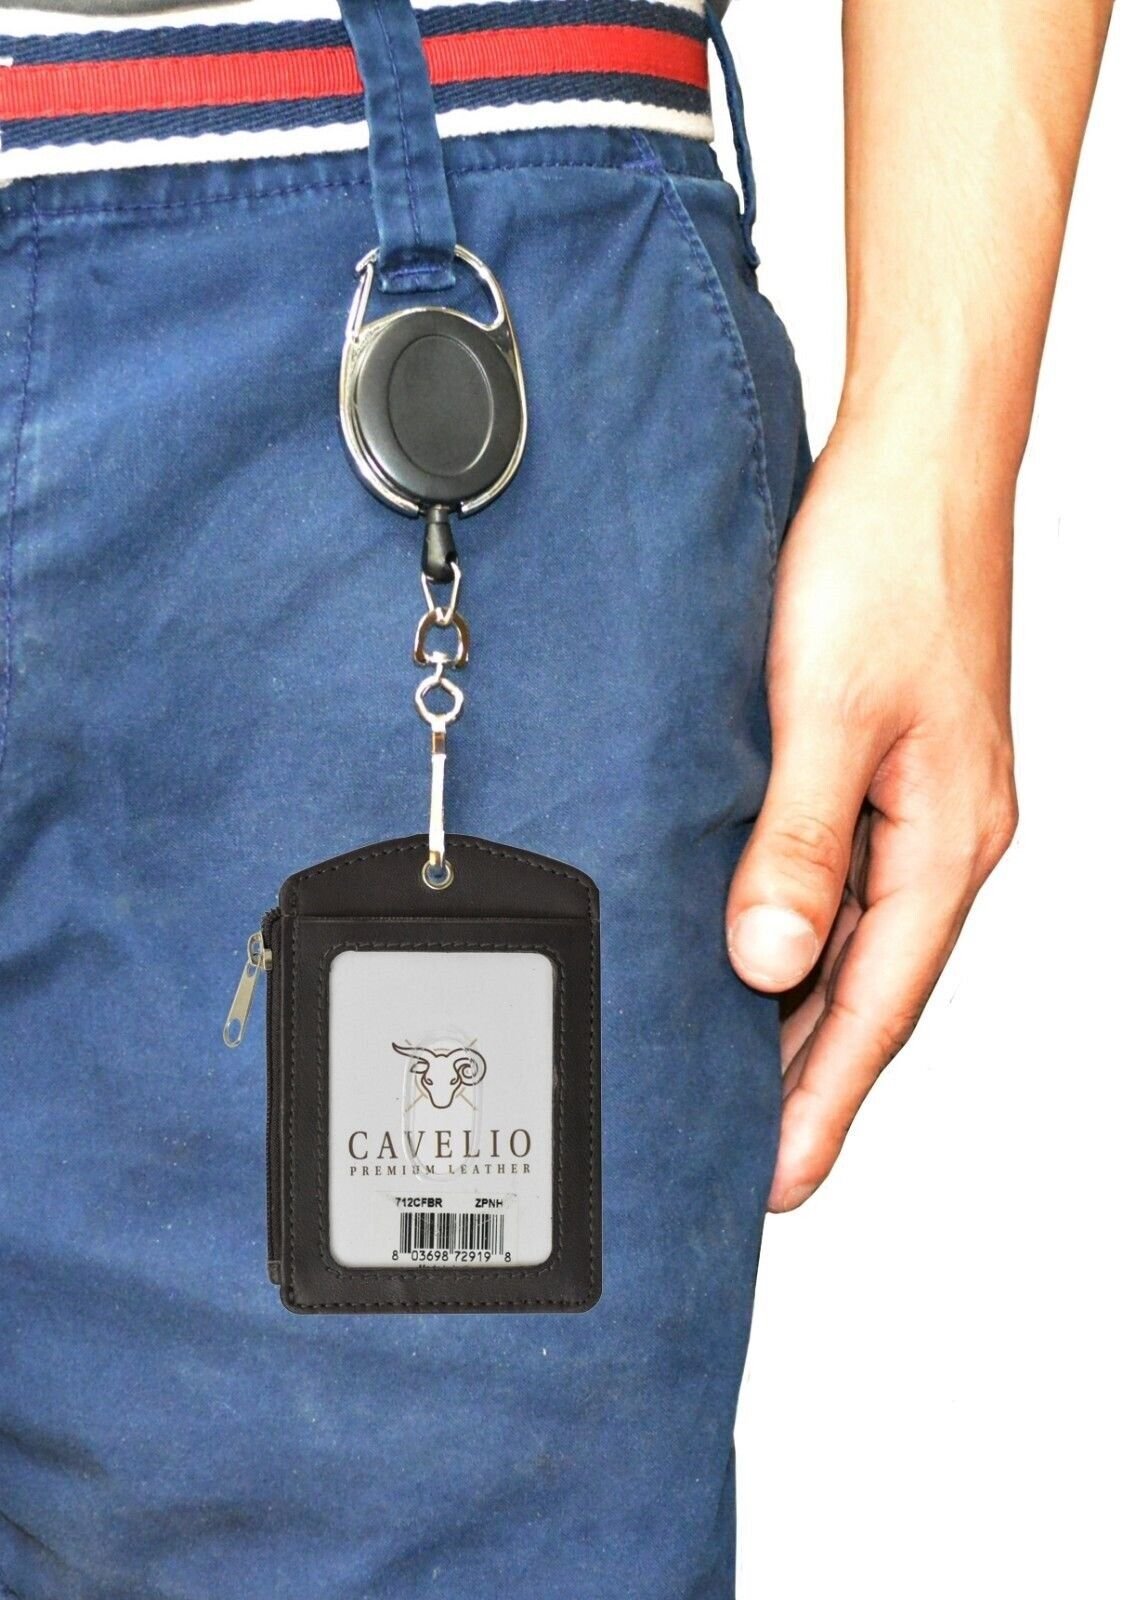 Cavelio Genuine Leather Badge/ID Holder+Credit Card Holder with Reel Selections